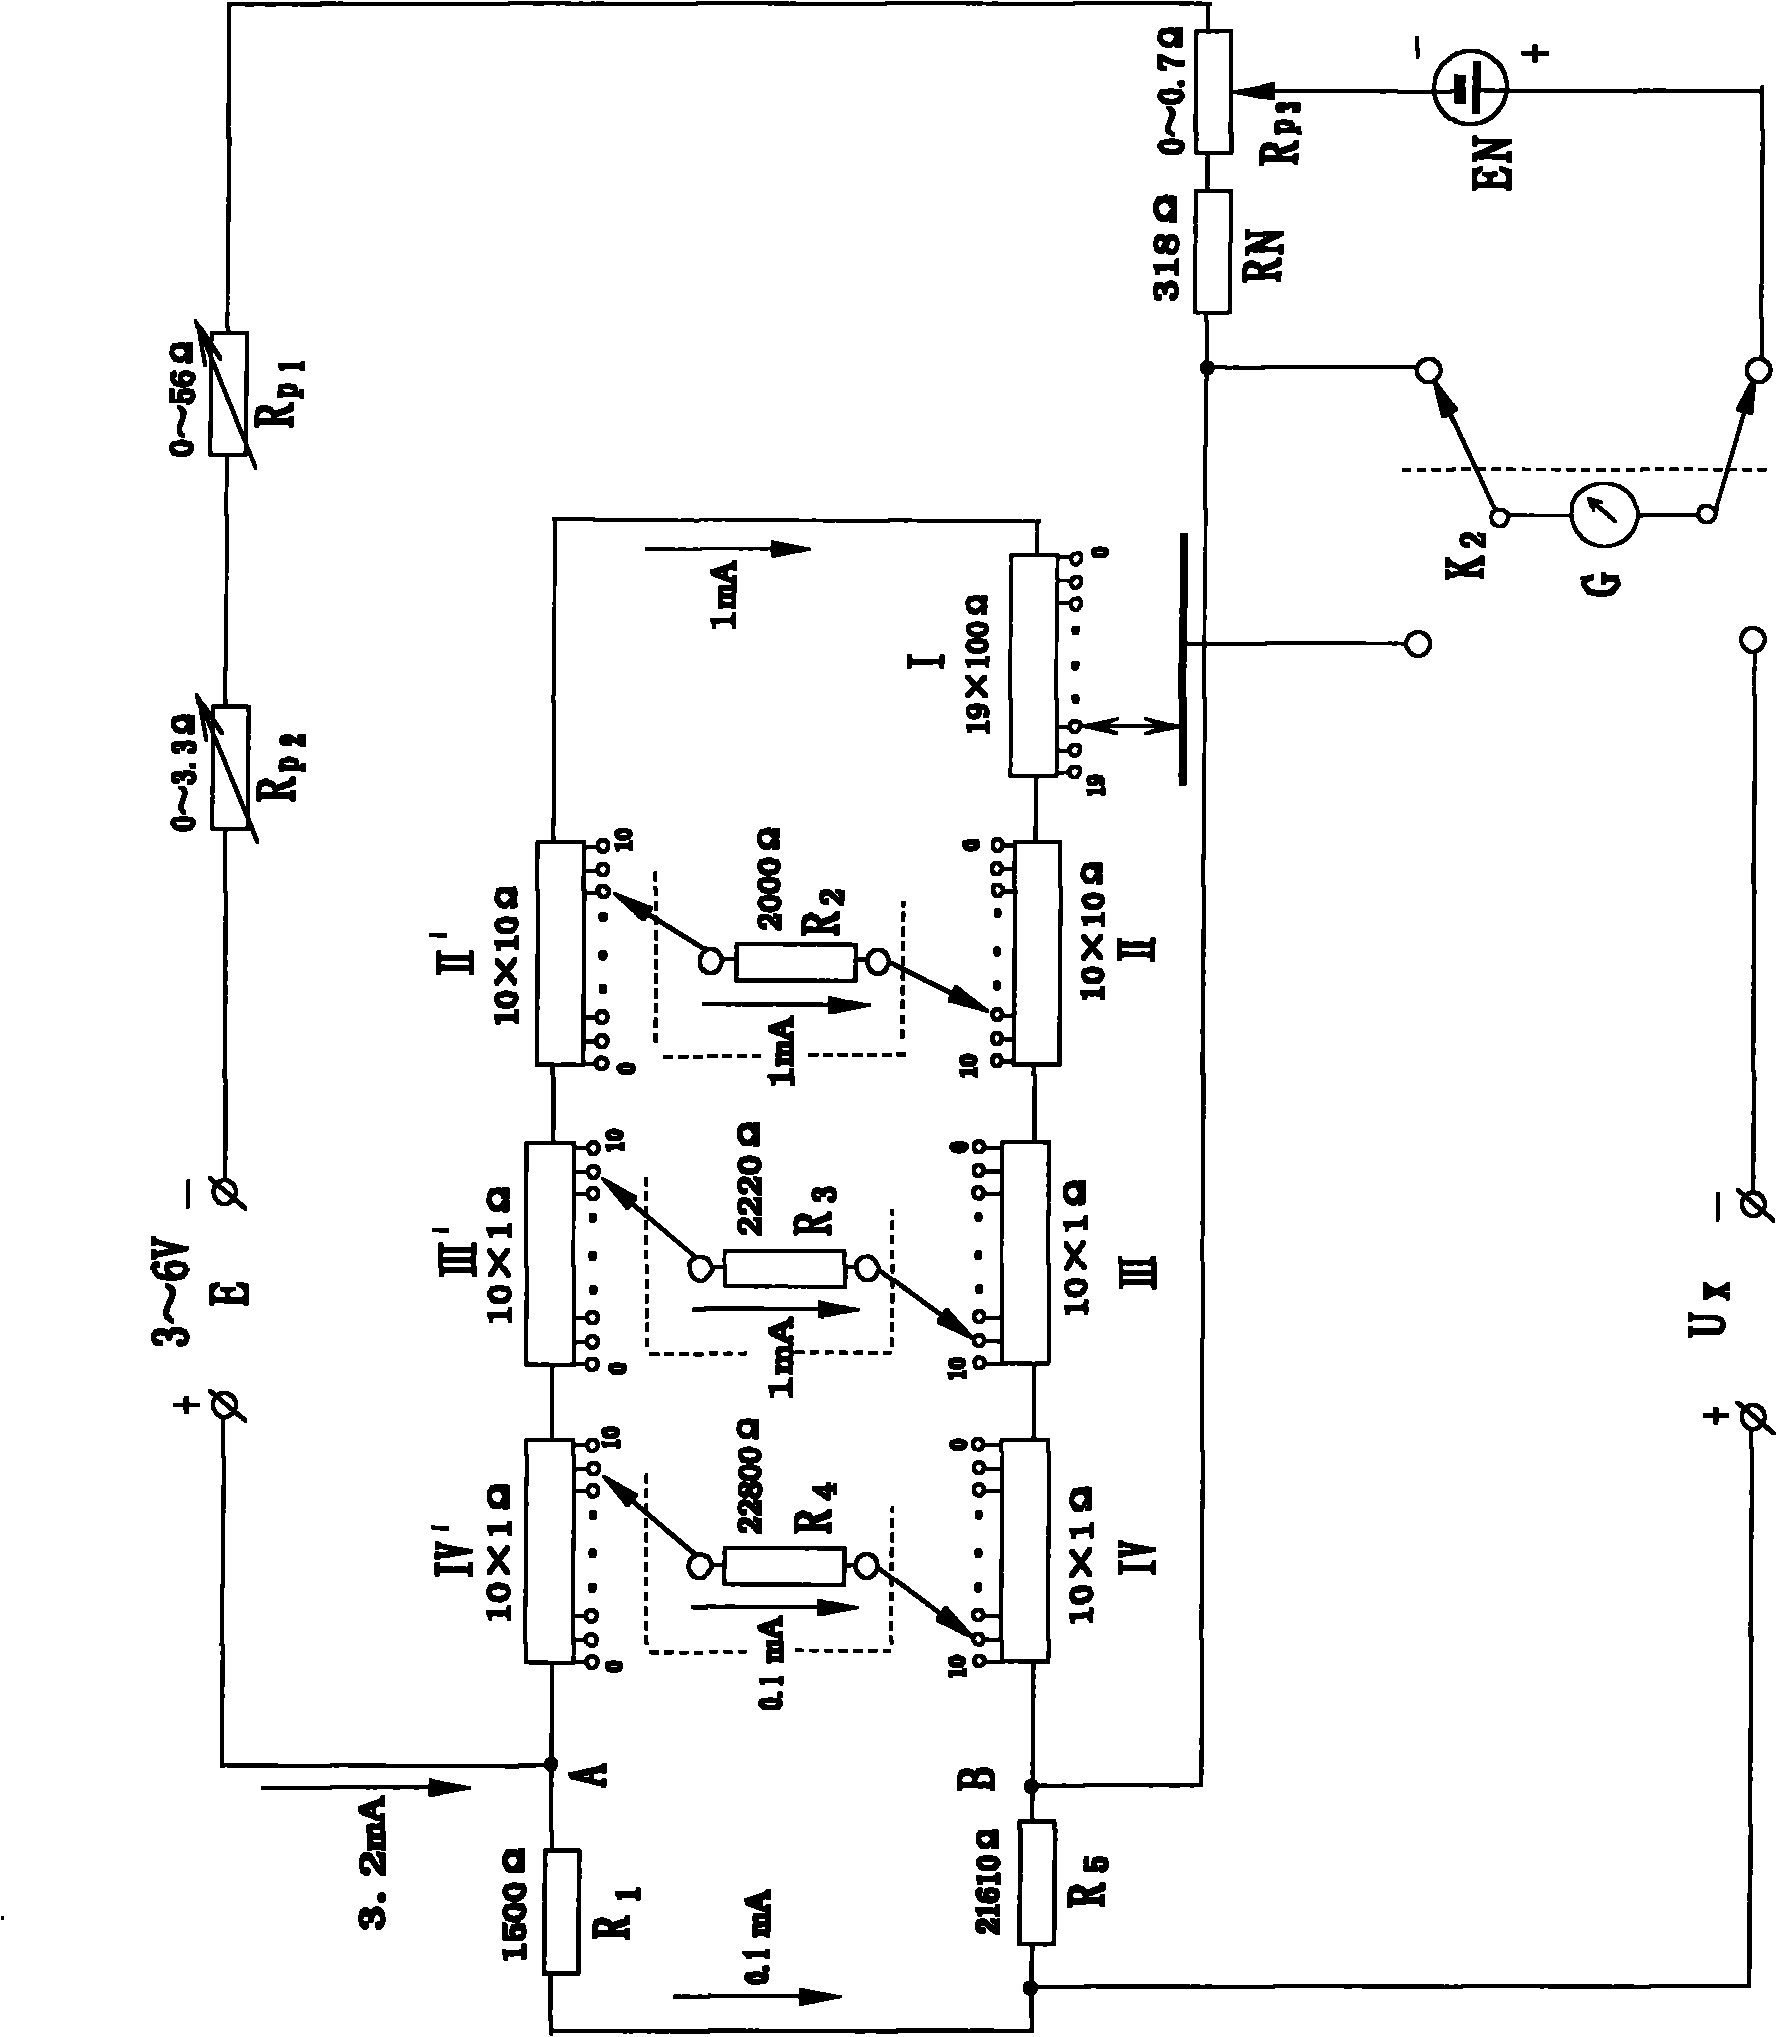 Potentiometer with four step plates